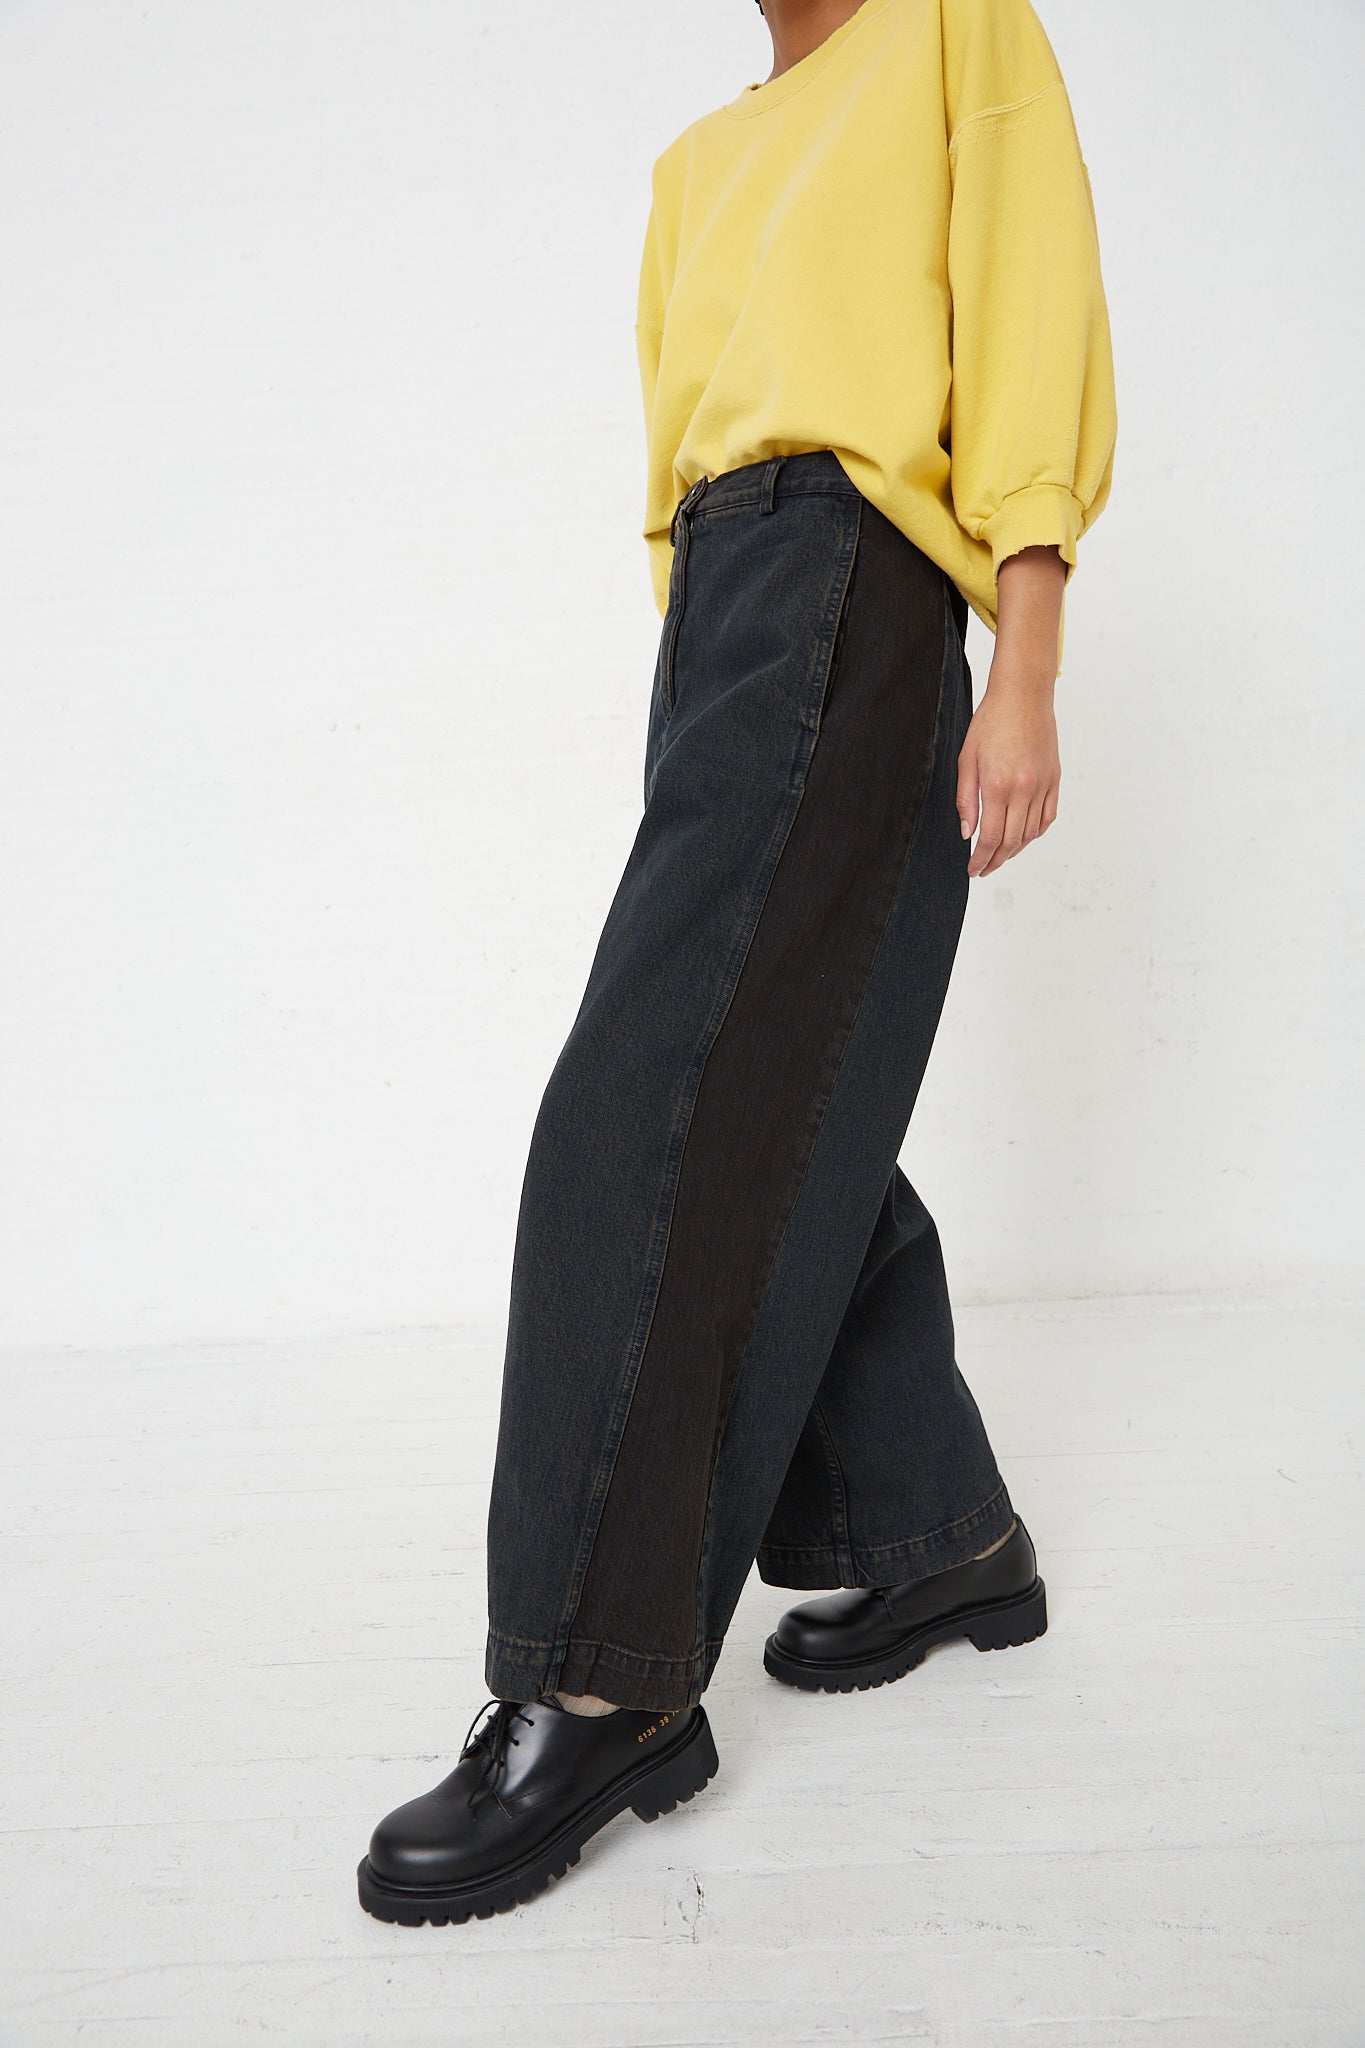 A woman wearing a yellow sweater and Rachel Comey's Denim Garra Pant in Brown.